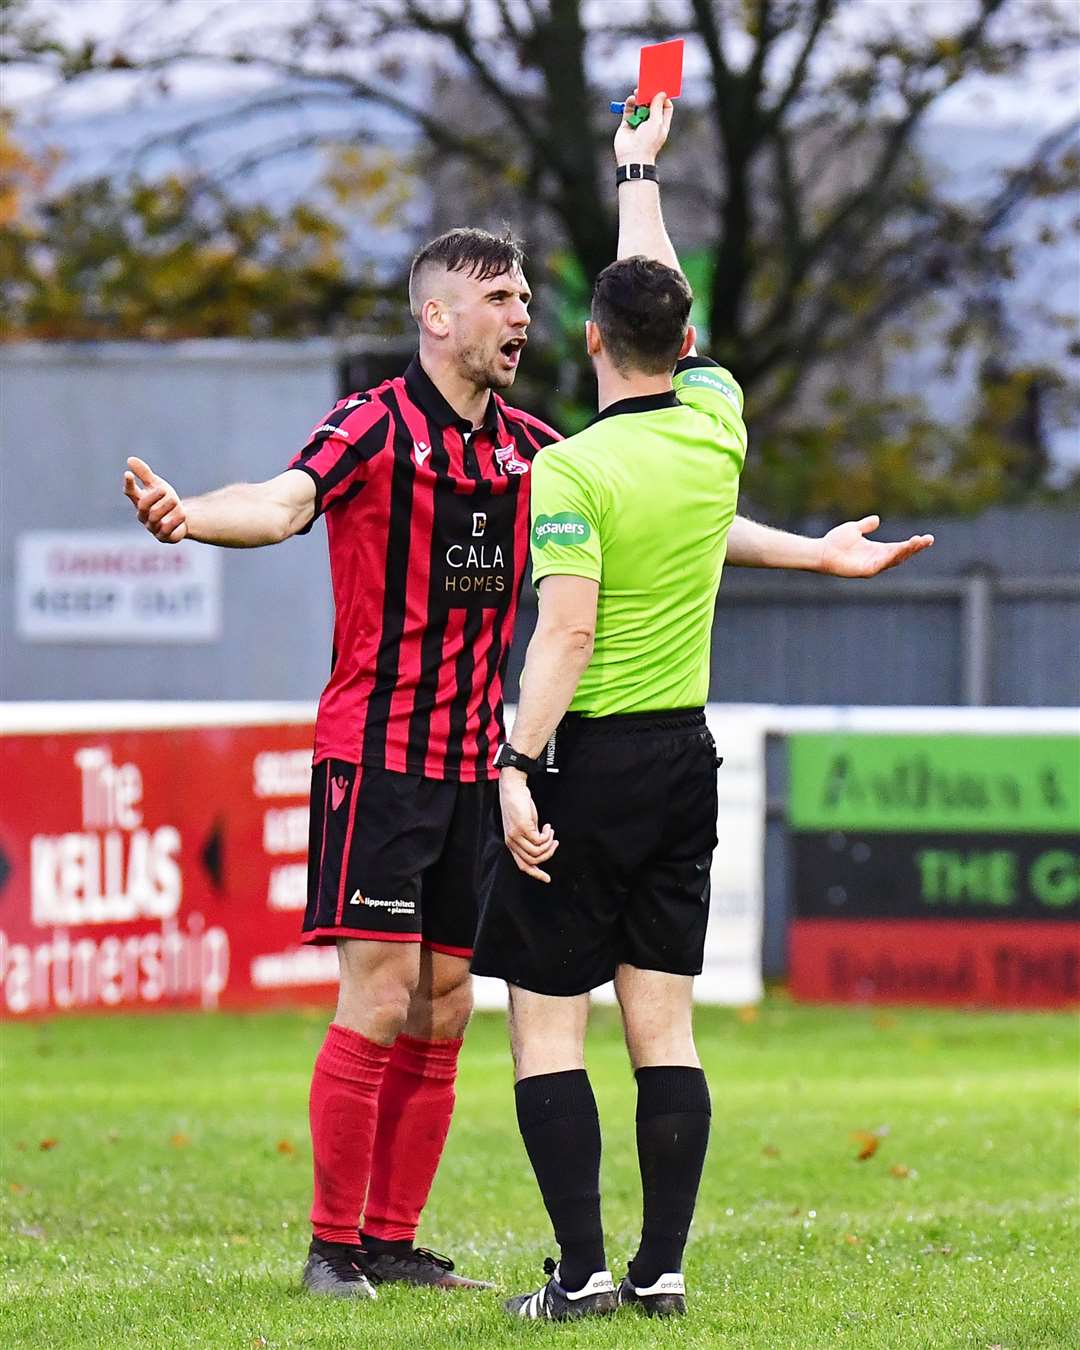 Inverurie's Mark Souter fumes as referee Liam Duncan shows him red card for bringing down Wick's Jack Halliday in the penalty box. Picture: Mel Roger